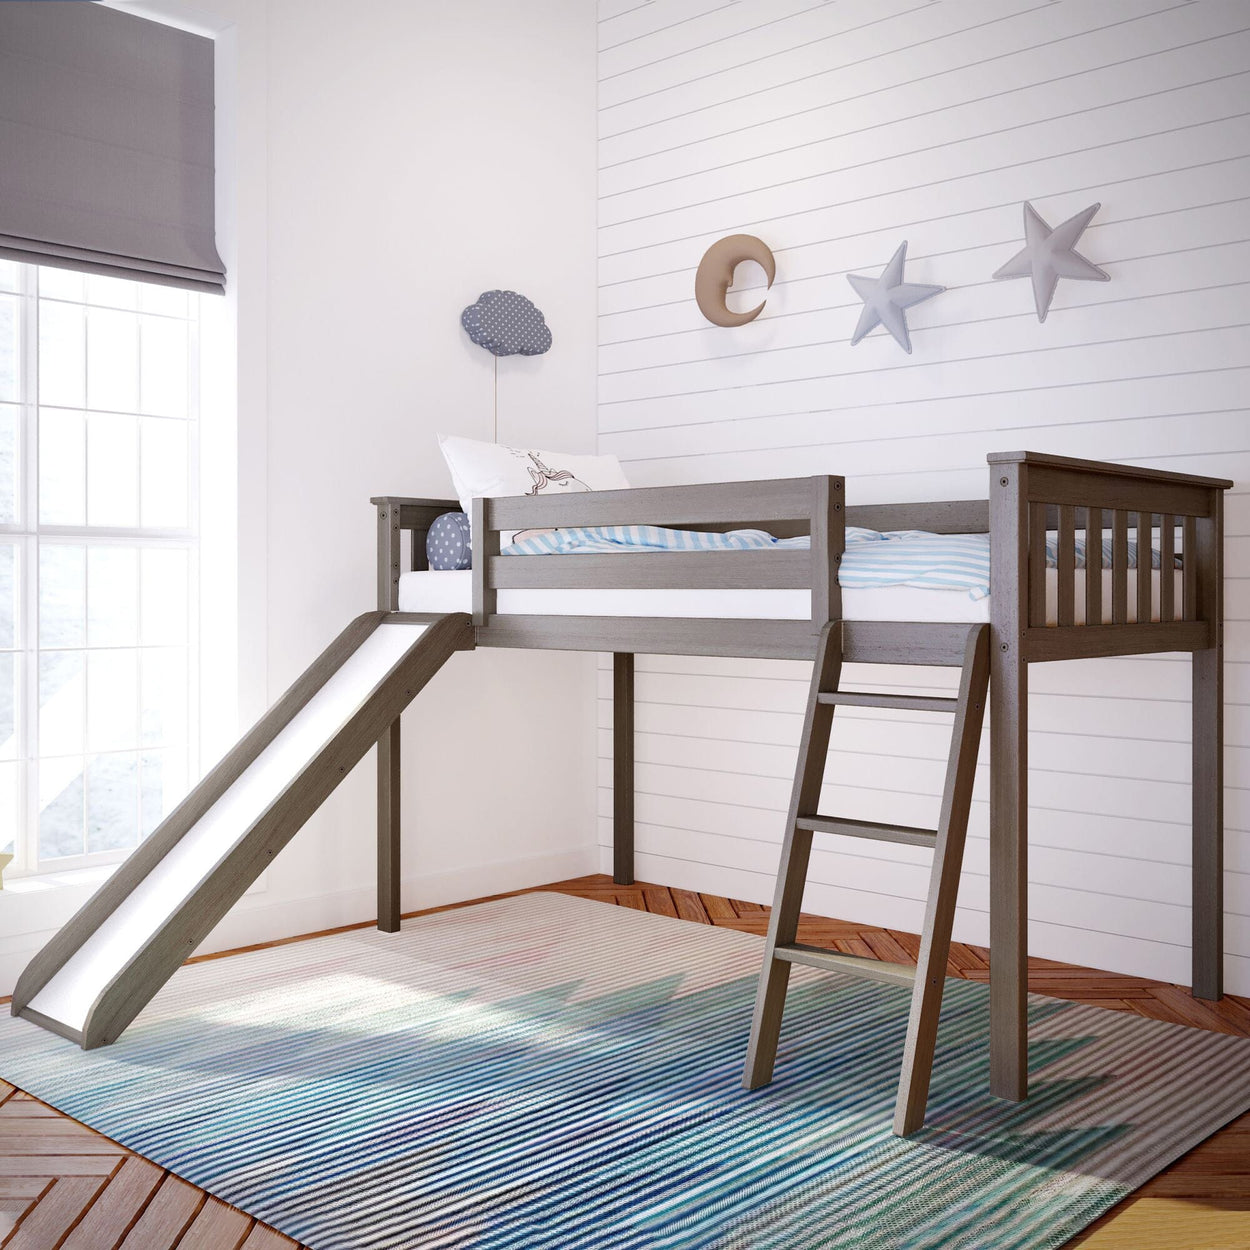 180213-151 : Loft Beds Twin-Size Low Loft with Slide, Clay